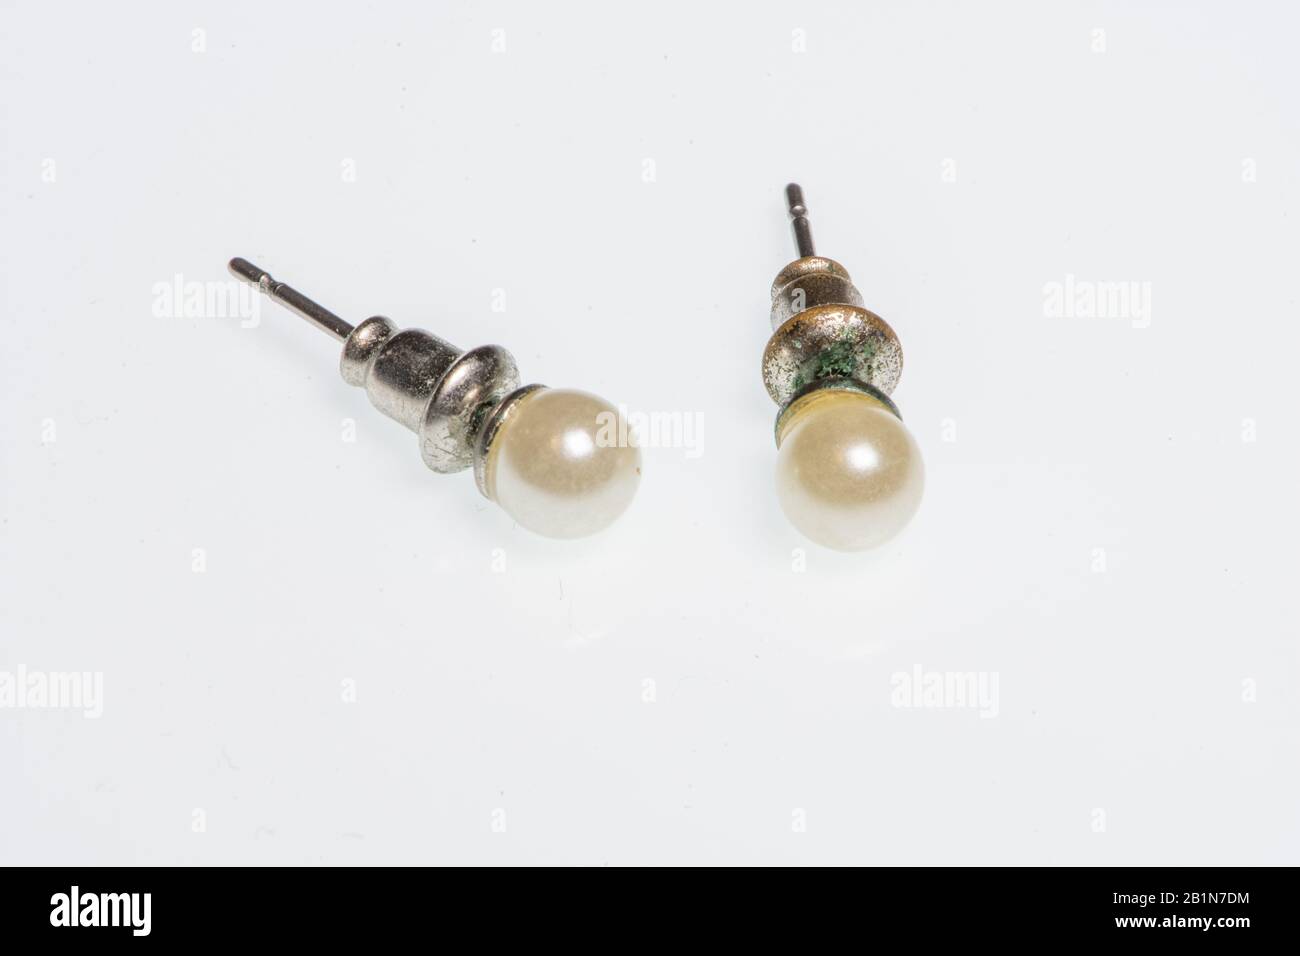 Pair of silver earrings with small pearl, detail image of jewel Stock Photo